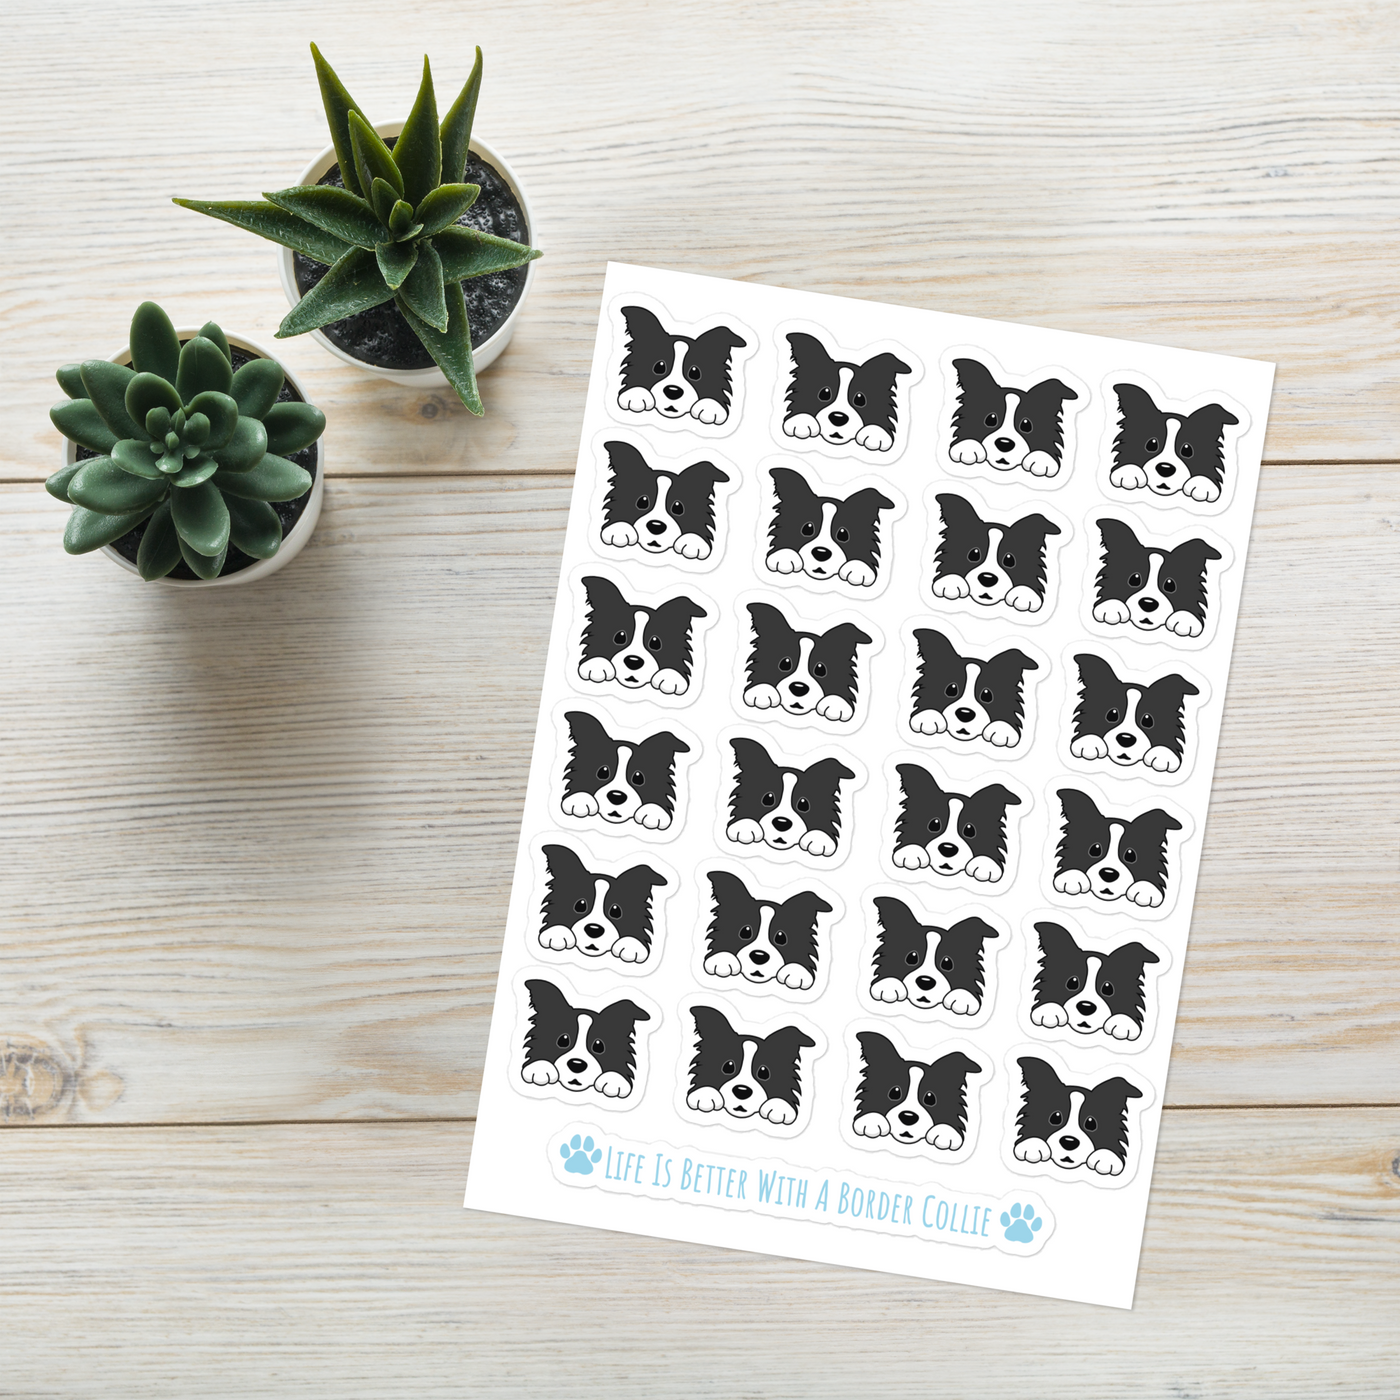 border collie sticker sheet | border collie stickers | Border collie decal | border collie gift for border collie lovers and dog owners 